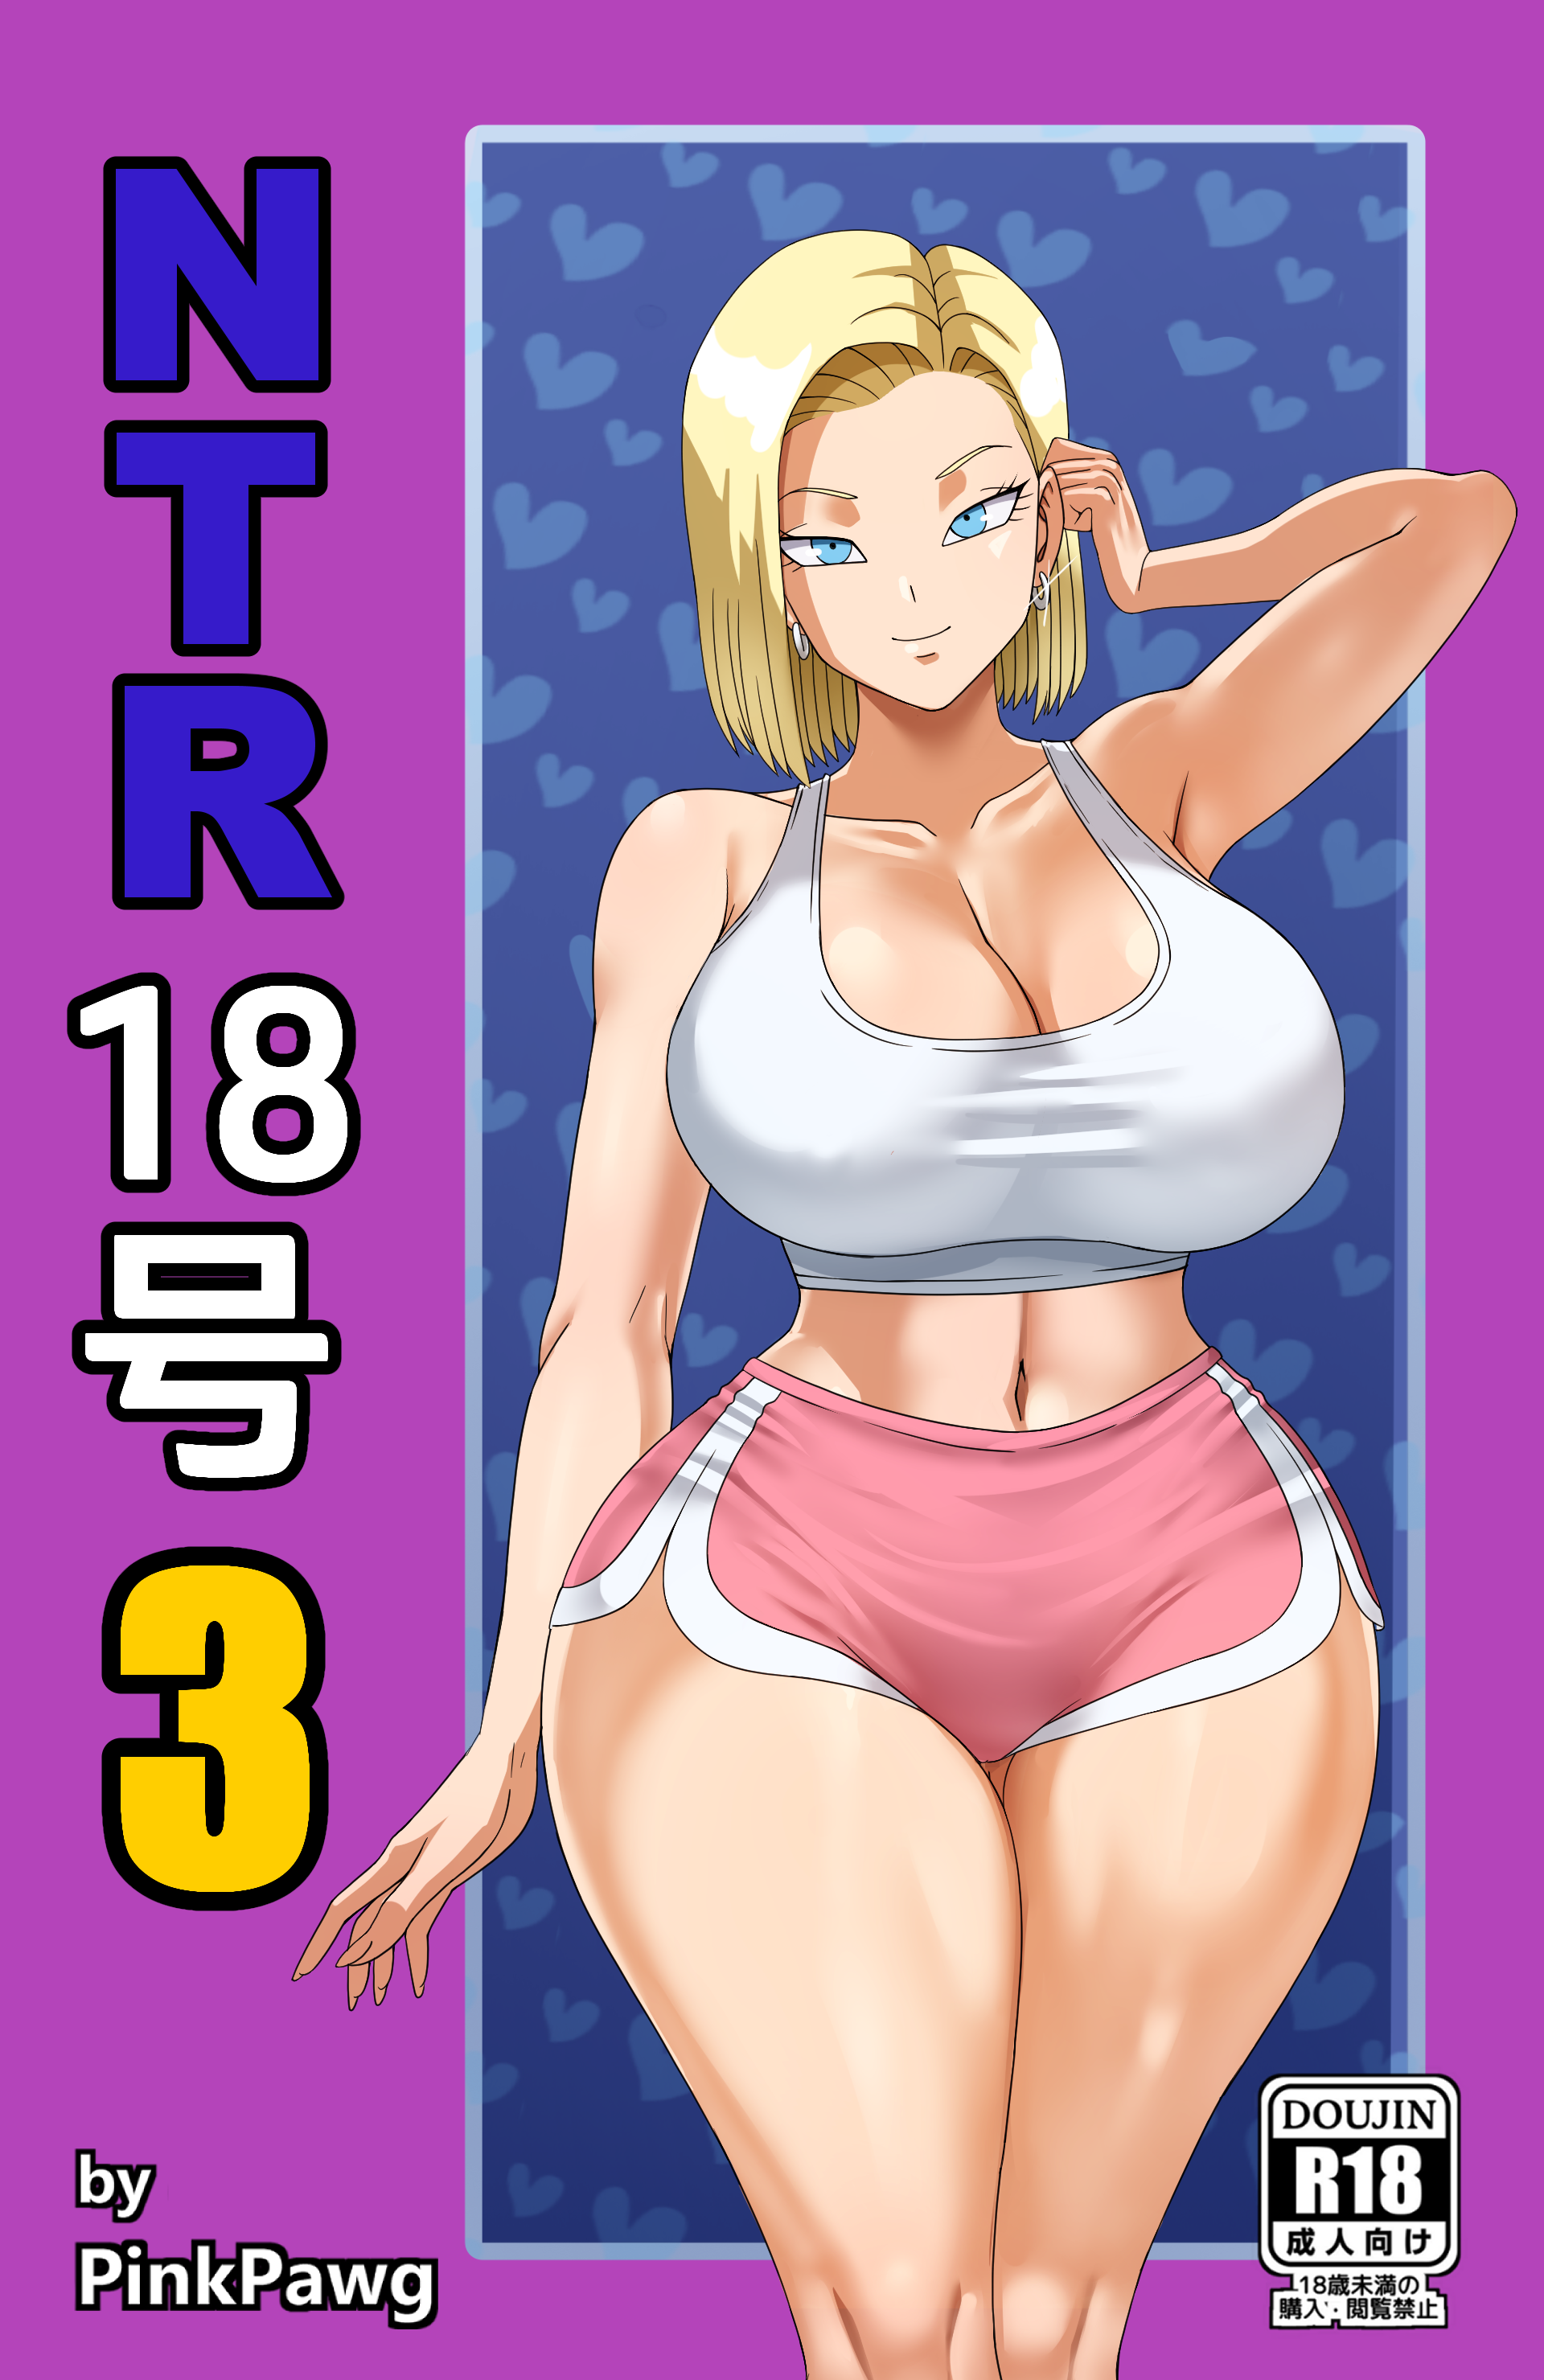 Android 18 pinkpawg